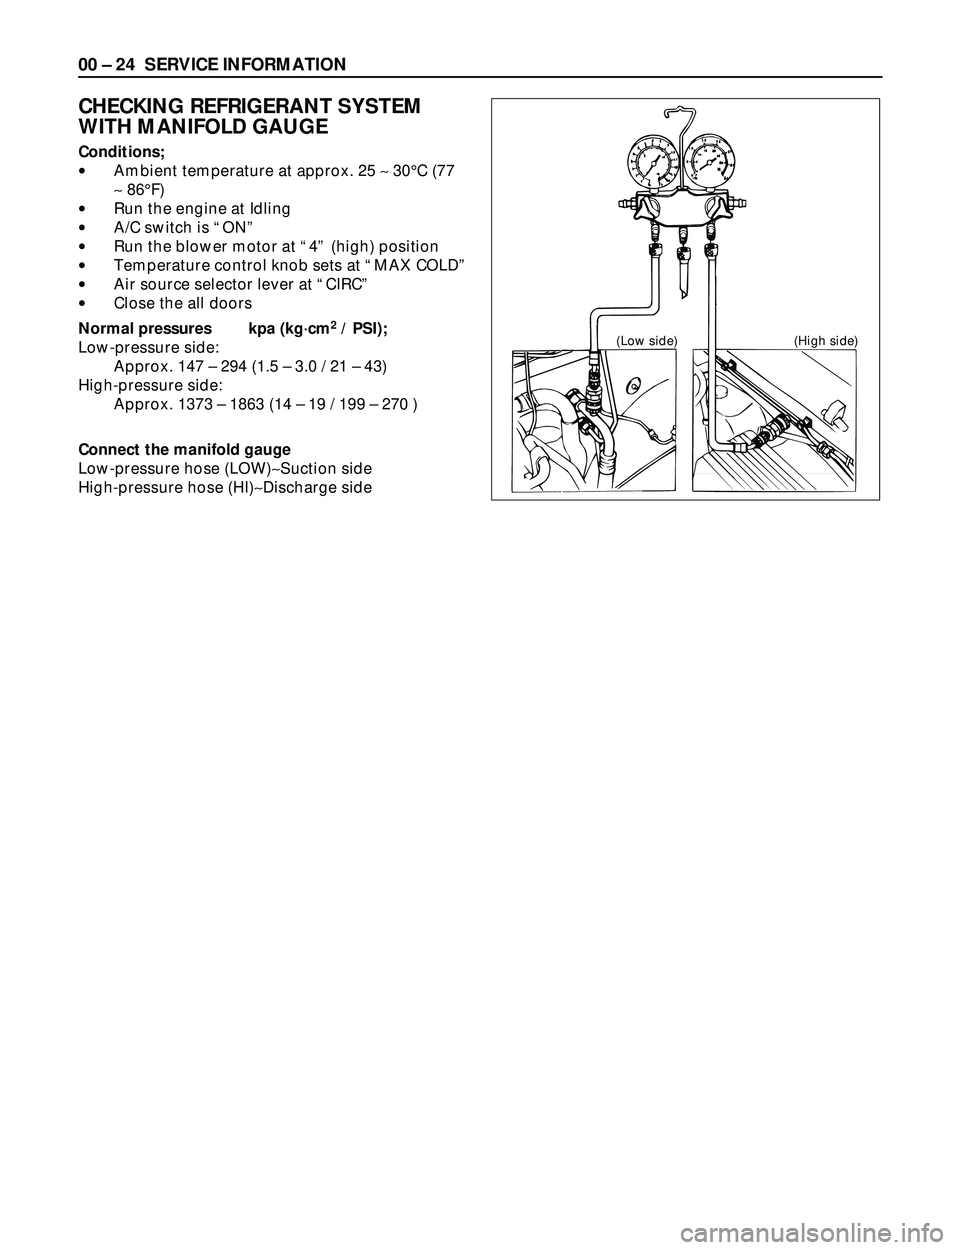 ISUZU TROOPER 1998  Service Manual PDF 00 Ð 24 SERVICE INFORMATION
CHECKING REFRIGERANT SYSTEM
WITH MANIFOLD GAUGE
Conditions;
·Ambient temperature at approx. 25 ~30°C (77
~86°F)
·Run the engine at Idling
·A/C switch is ÒONÓ
·Run 